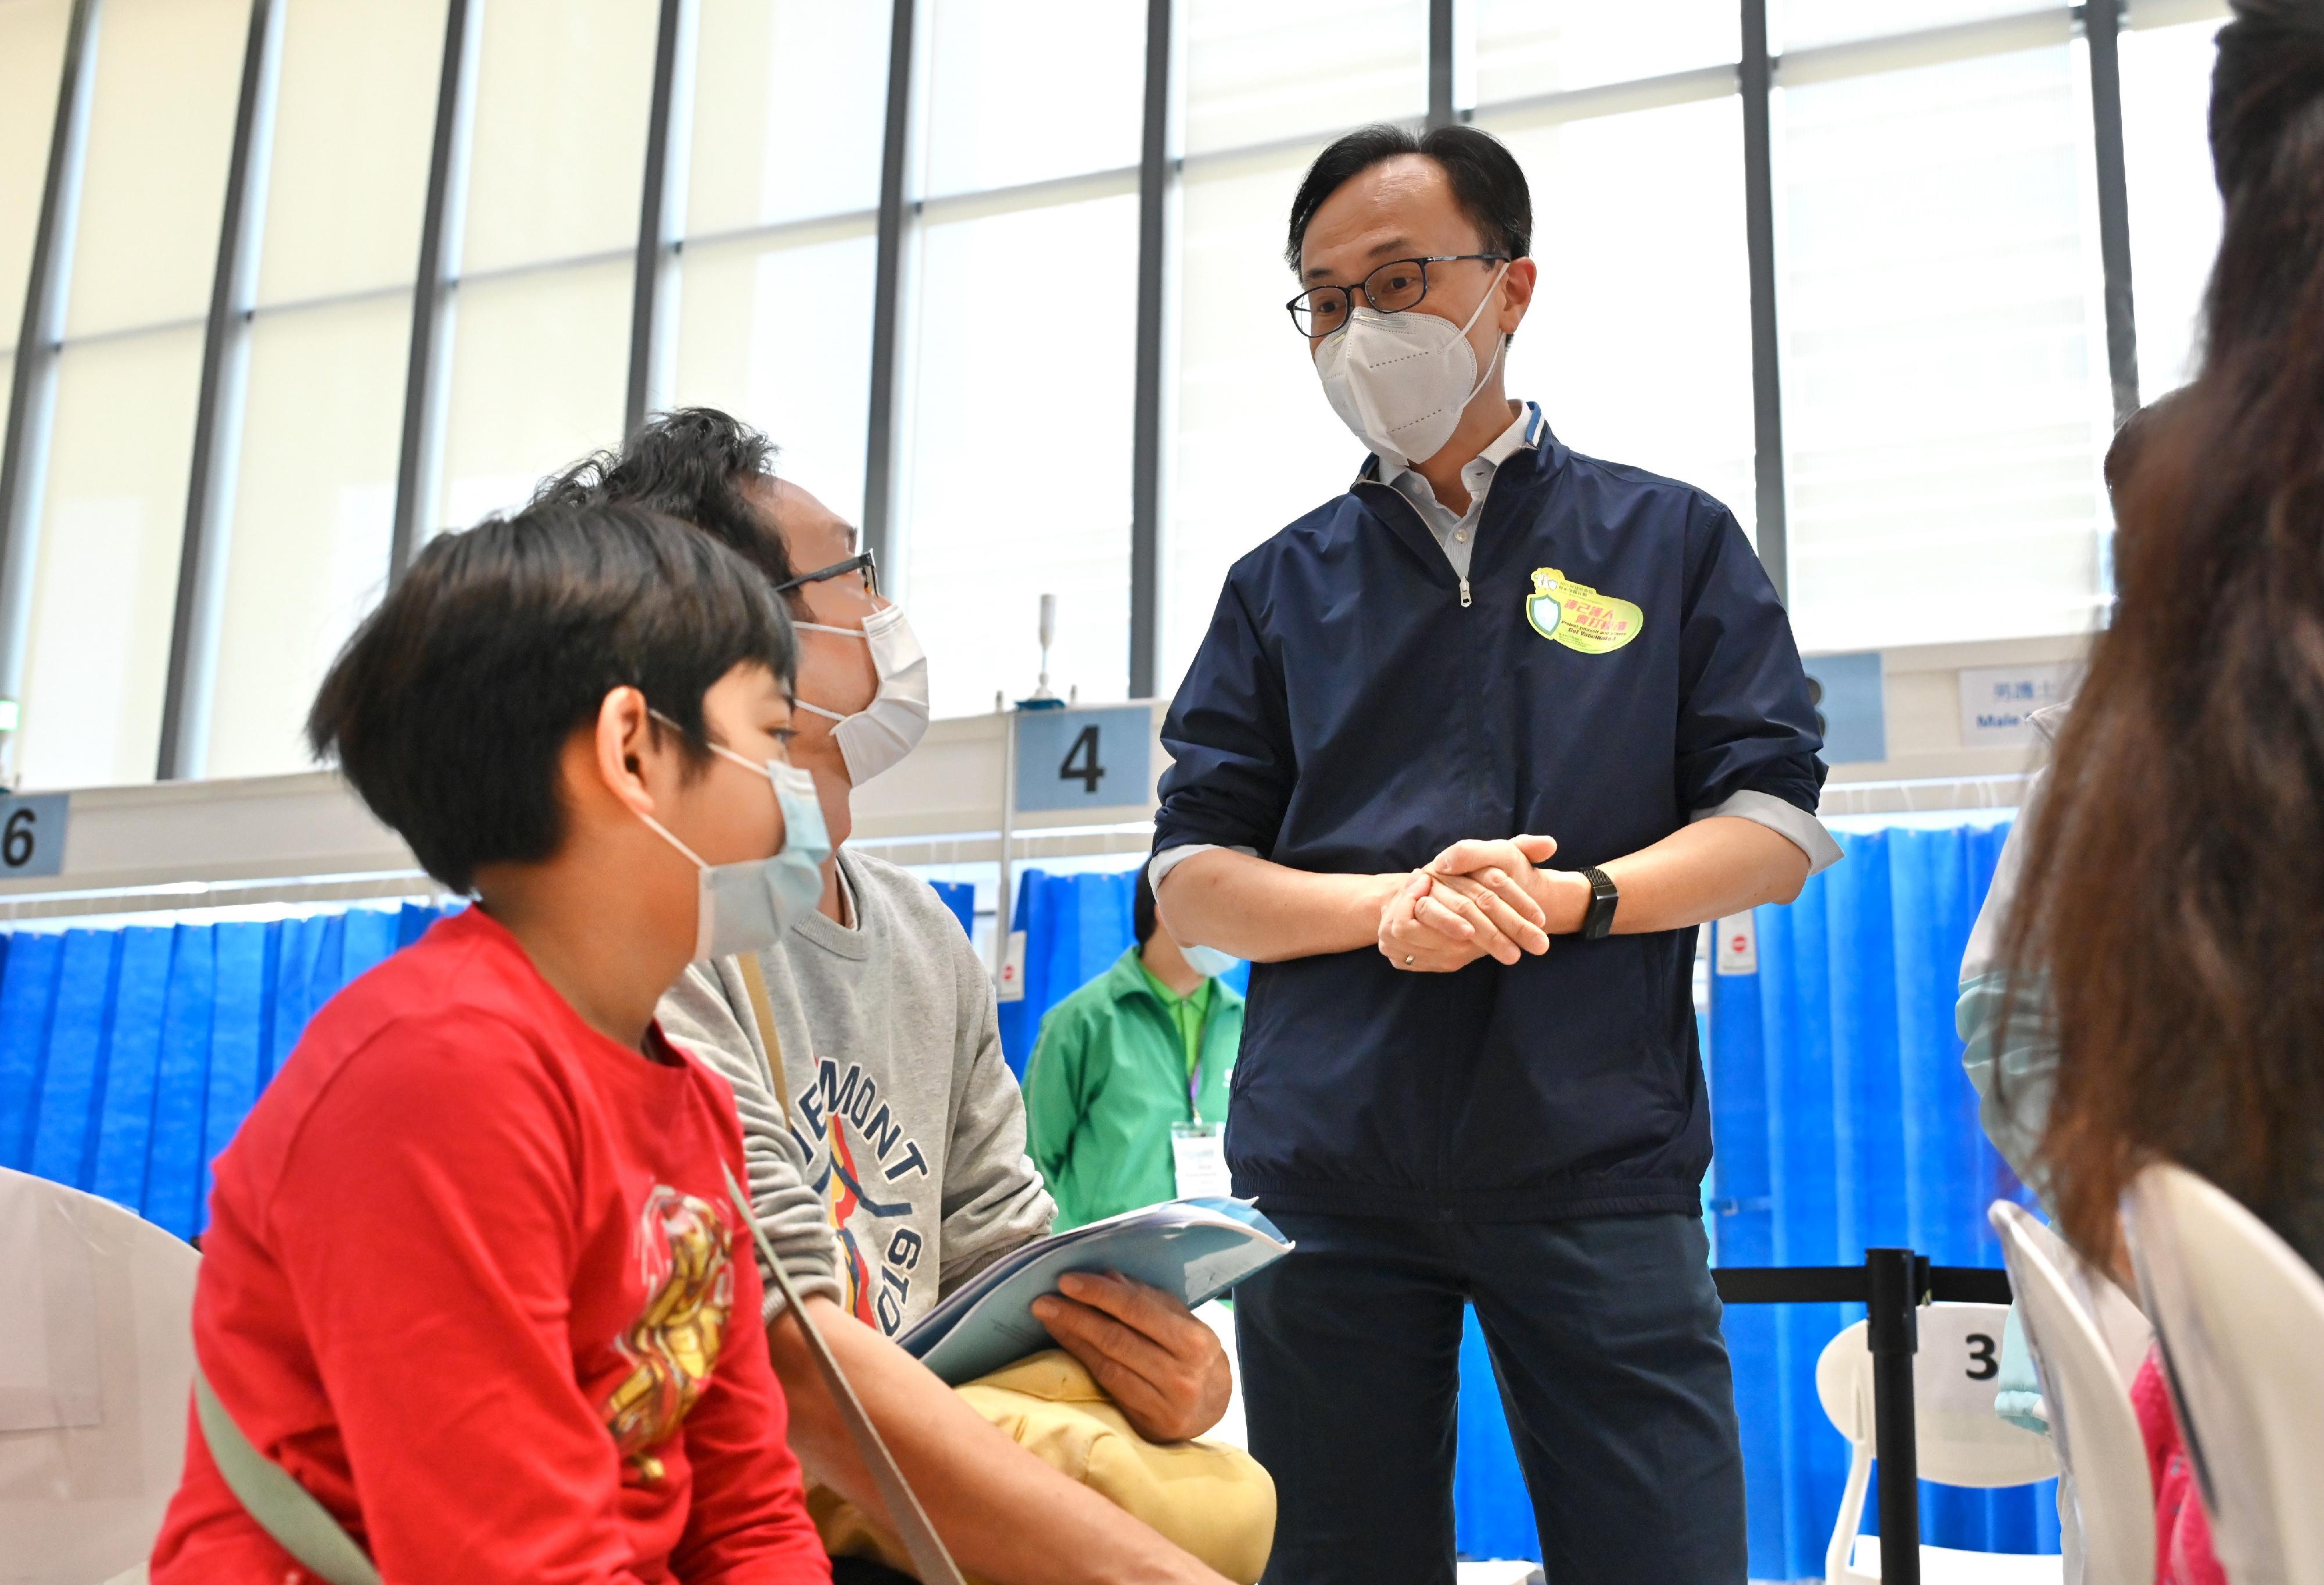 The Secretary for the Civil Service, Mr Patrick Nip, today (March 12) visited the Hong Kong Children's Hospital Children Community Vaccination Centre in Kowloon Bay, which is dedicated to providing the BioNTech vaccine to children aged 5 to 11. Photo shows Mr Nip (first right) chatting with a parent and his child who is waiting to get vaccinated.